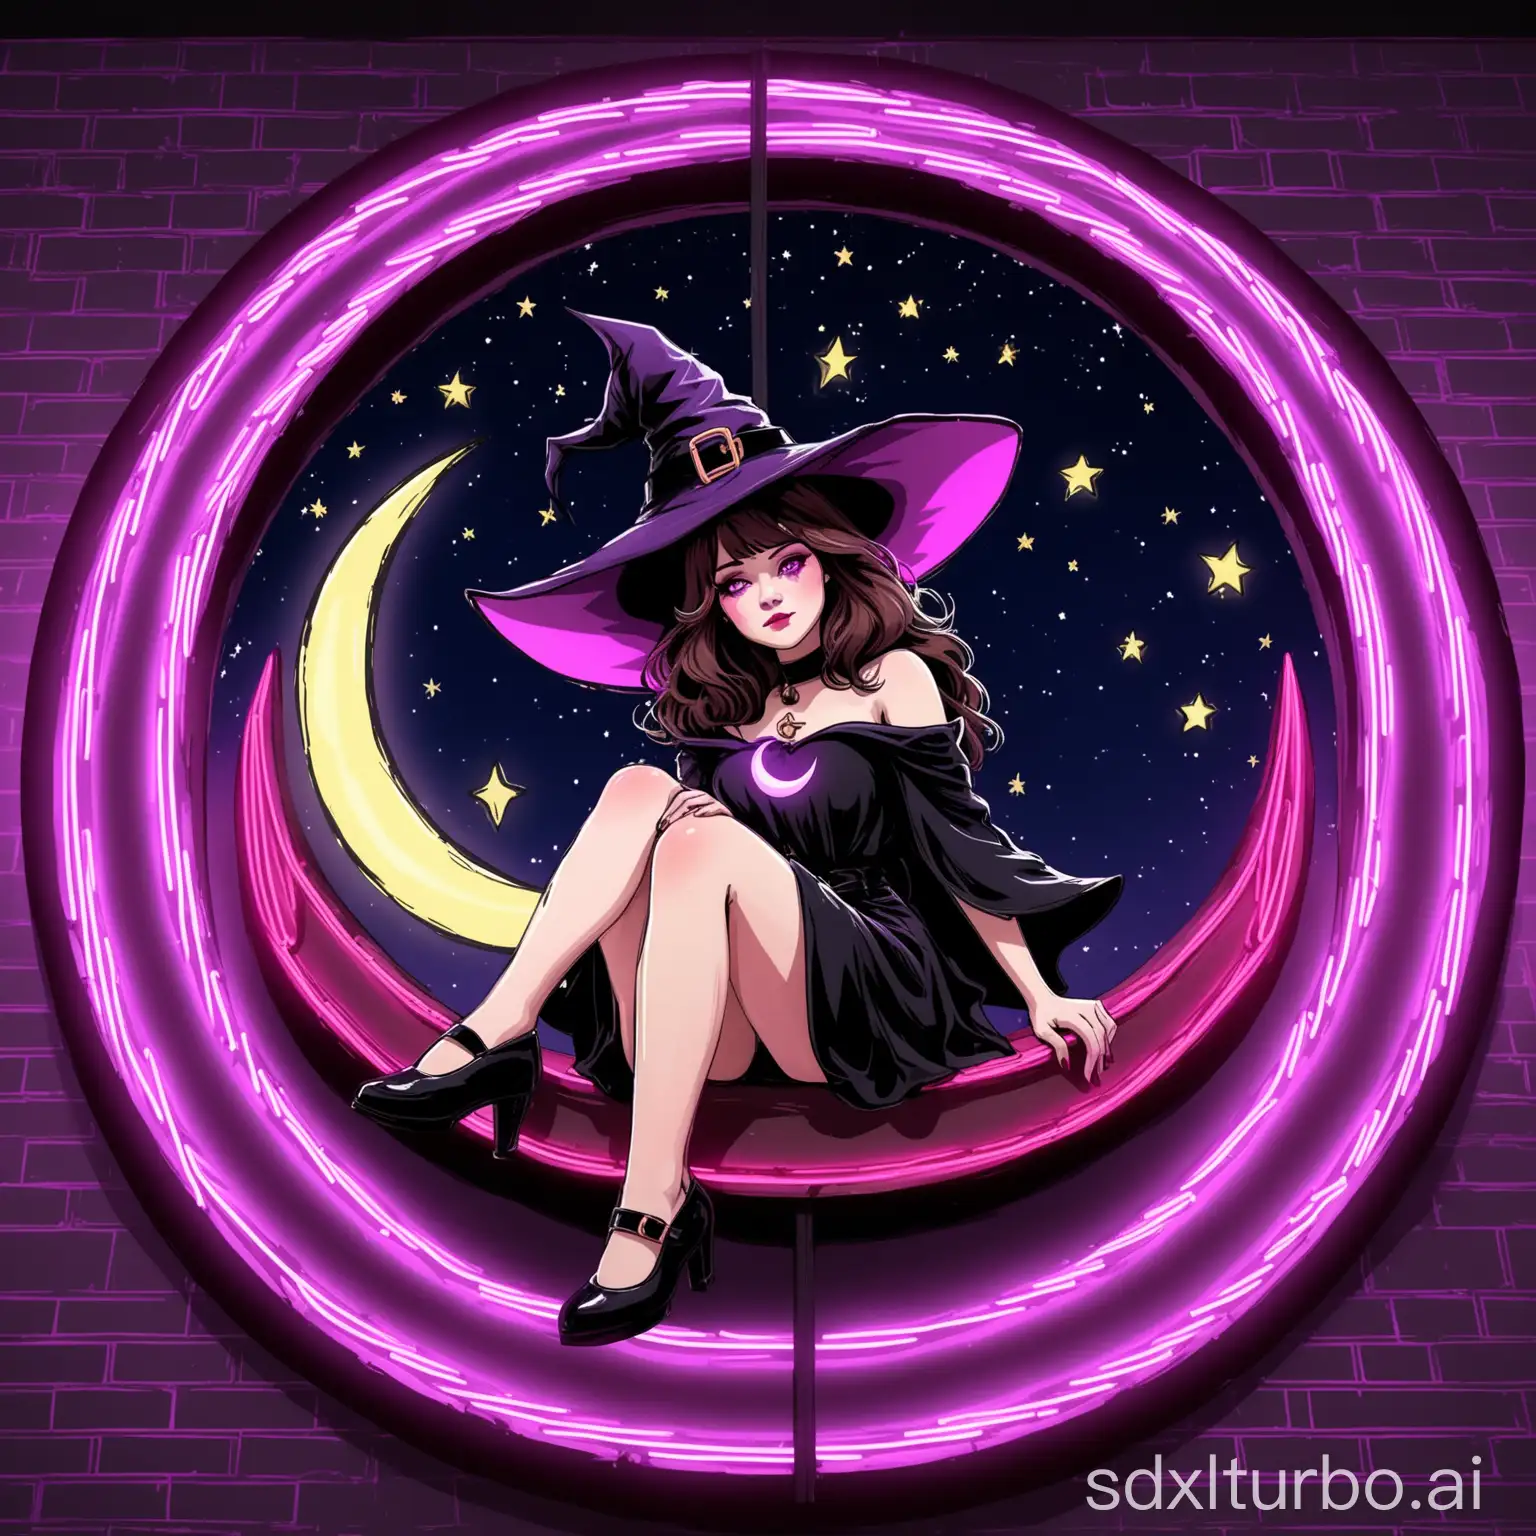 Beautiful-Woman-with-Pink-Purple-Witch-Hat-and-Medium-Brown-Hair-Sitting-Inside-Neon-Sign-Crescent-Moon-Witchy-Style